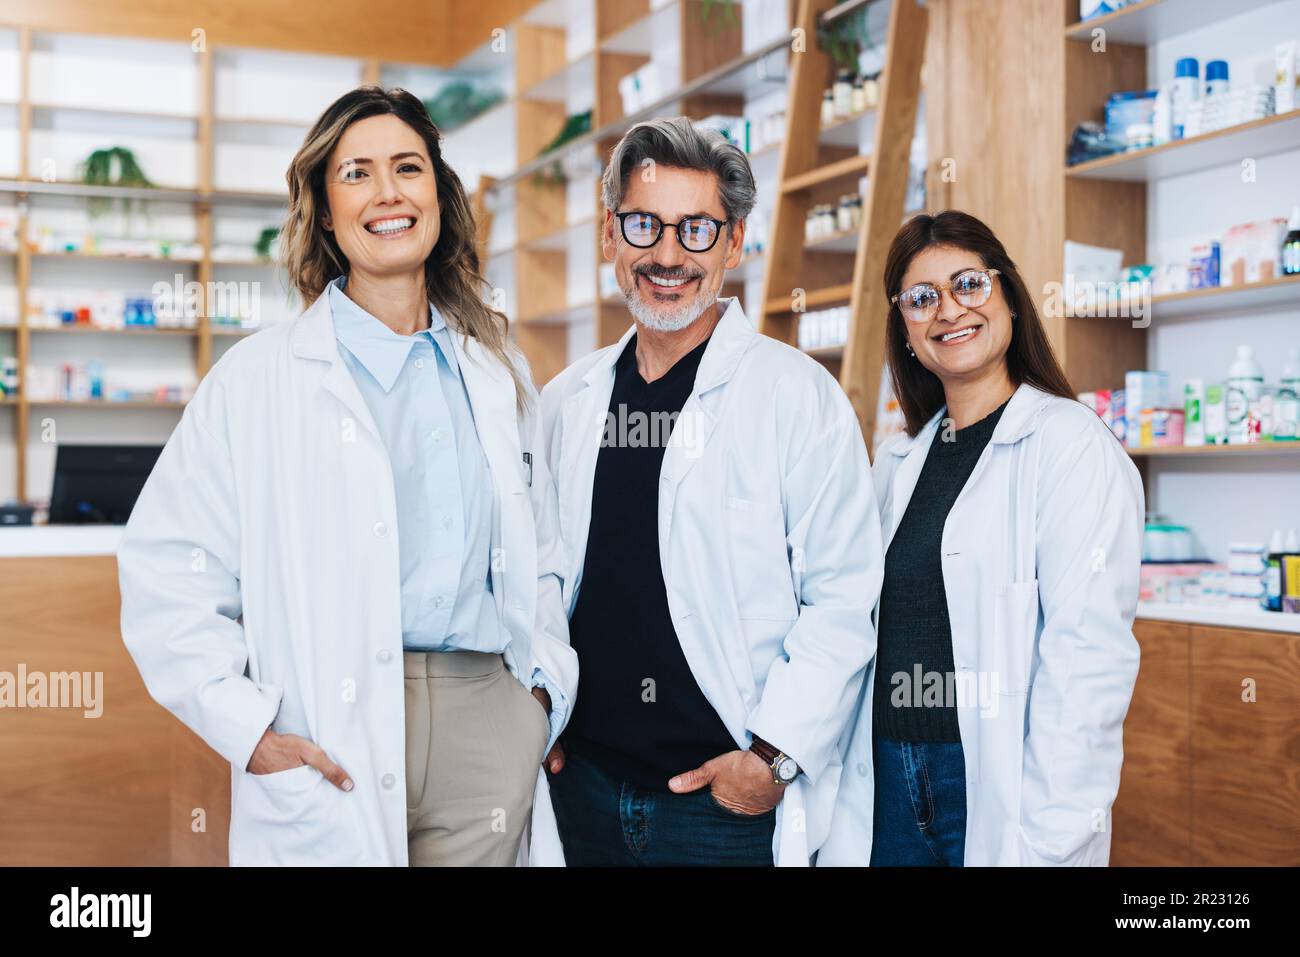 Group of pharmacists standing together and looking at the camera in a chemist. Three healthcare providers working in a pharmacy. Stock Photo